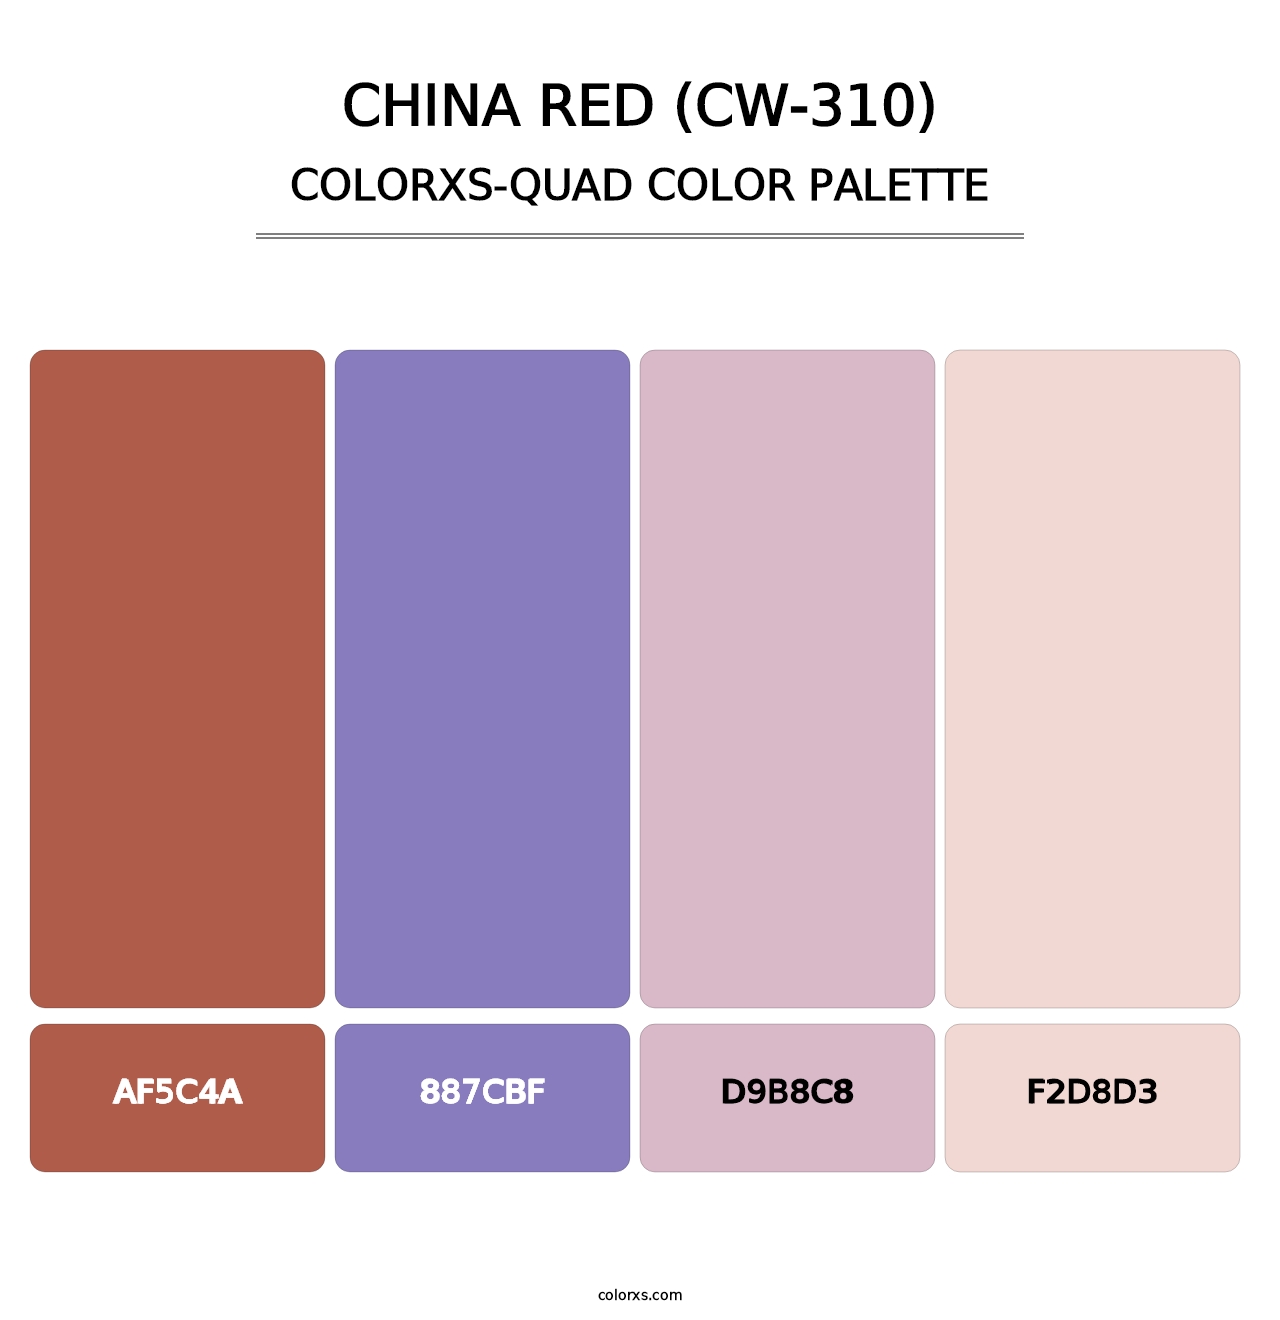 China Red (CW-310) - Colorxs Quad Palette